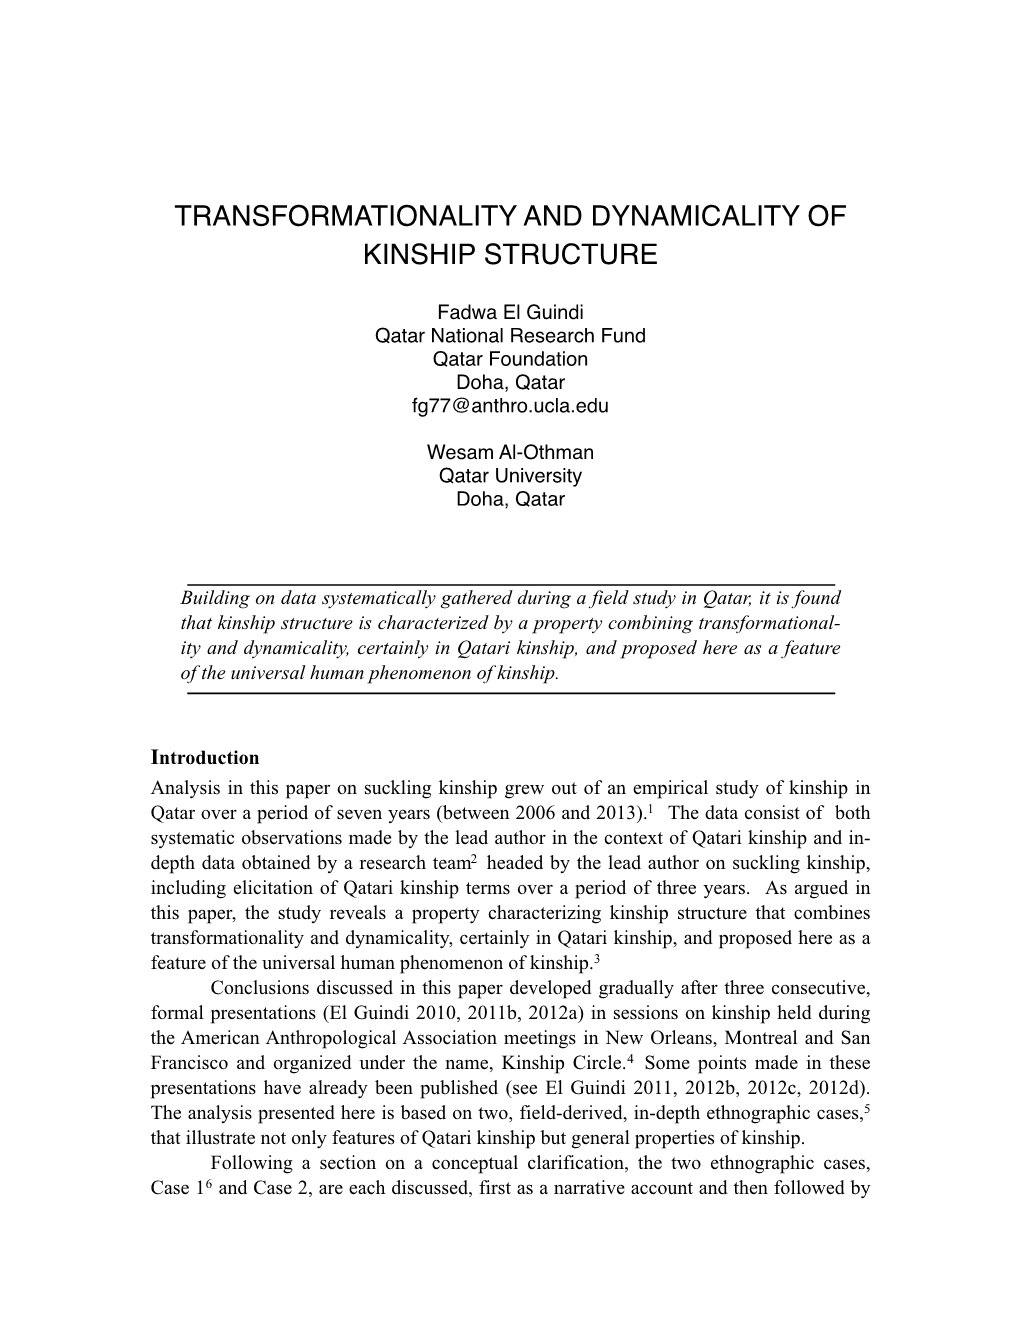 Transformationality and Dynamicality of Kinship Structure